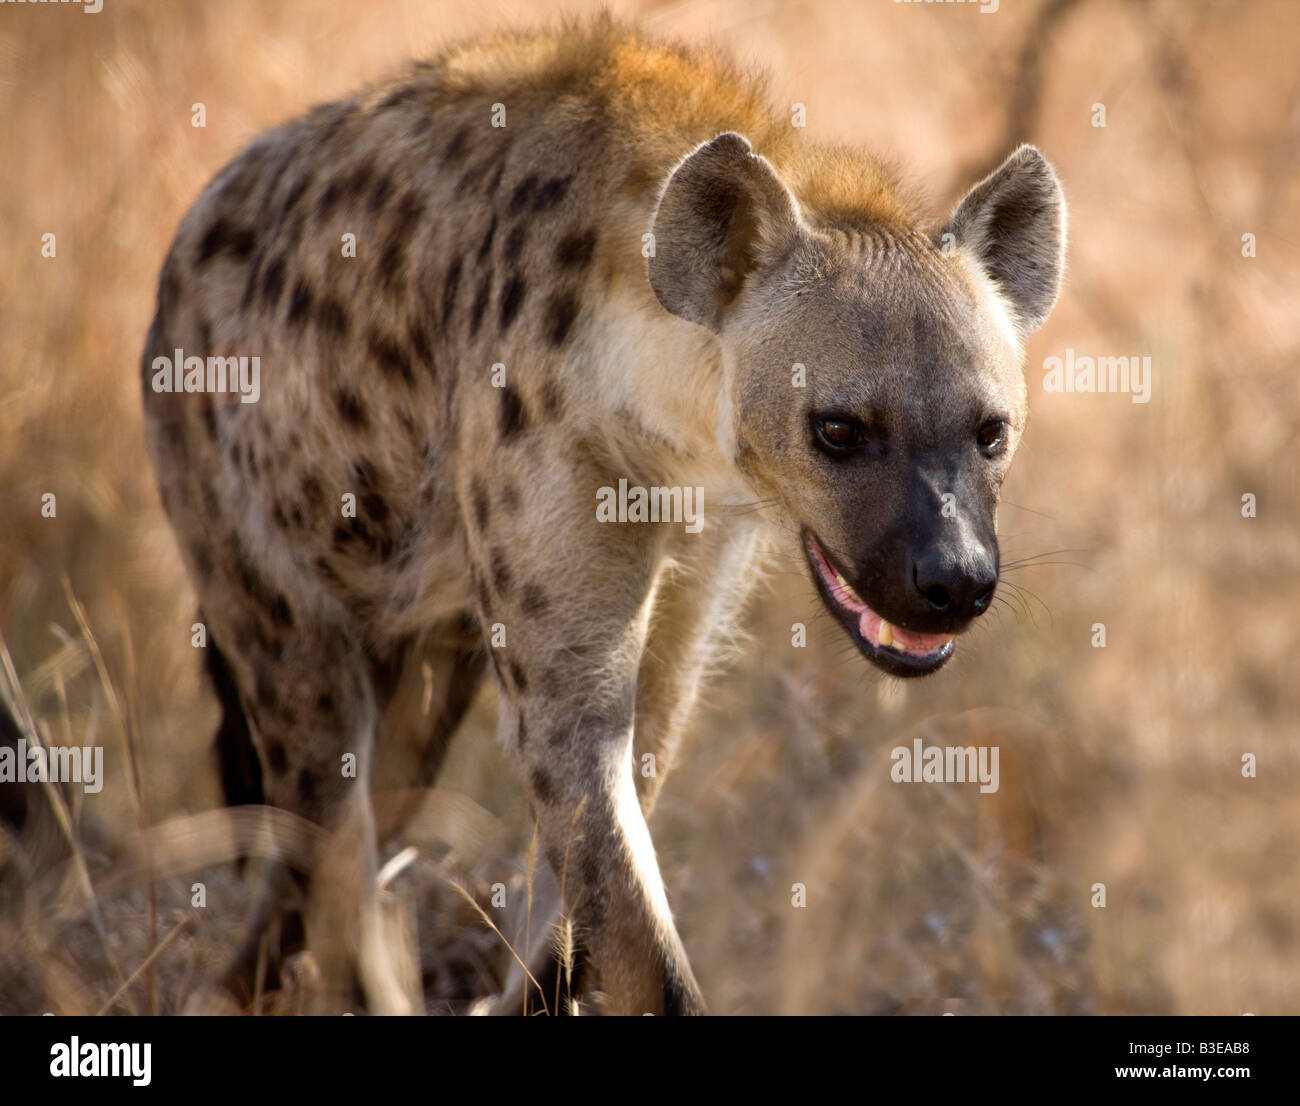 Female laughing hyena or spotted hyena (Crocuta crocuta) in Kruger Park South Africa. Stock Photo